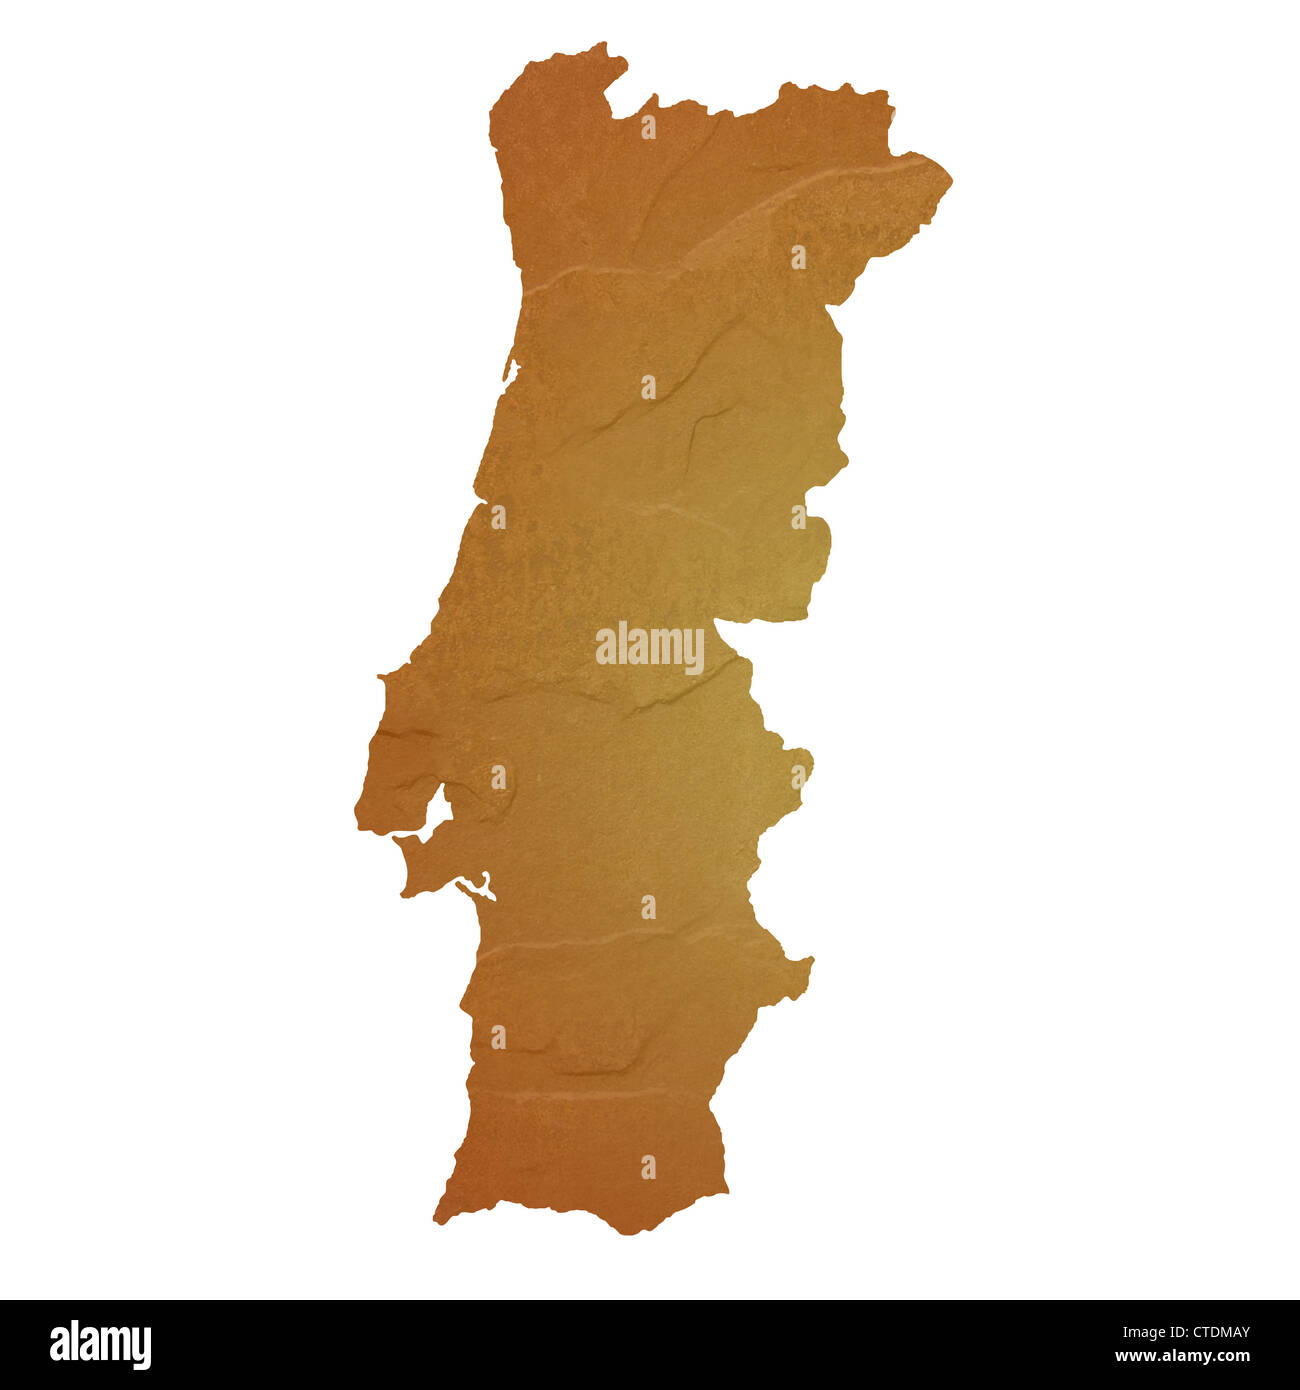 Portugal Physical Map stock vector. Illustration of elevation - 145582273